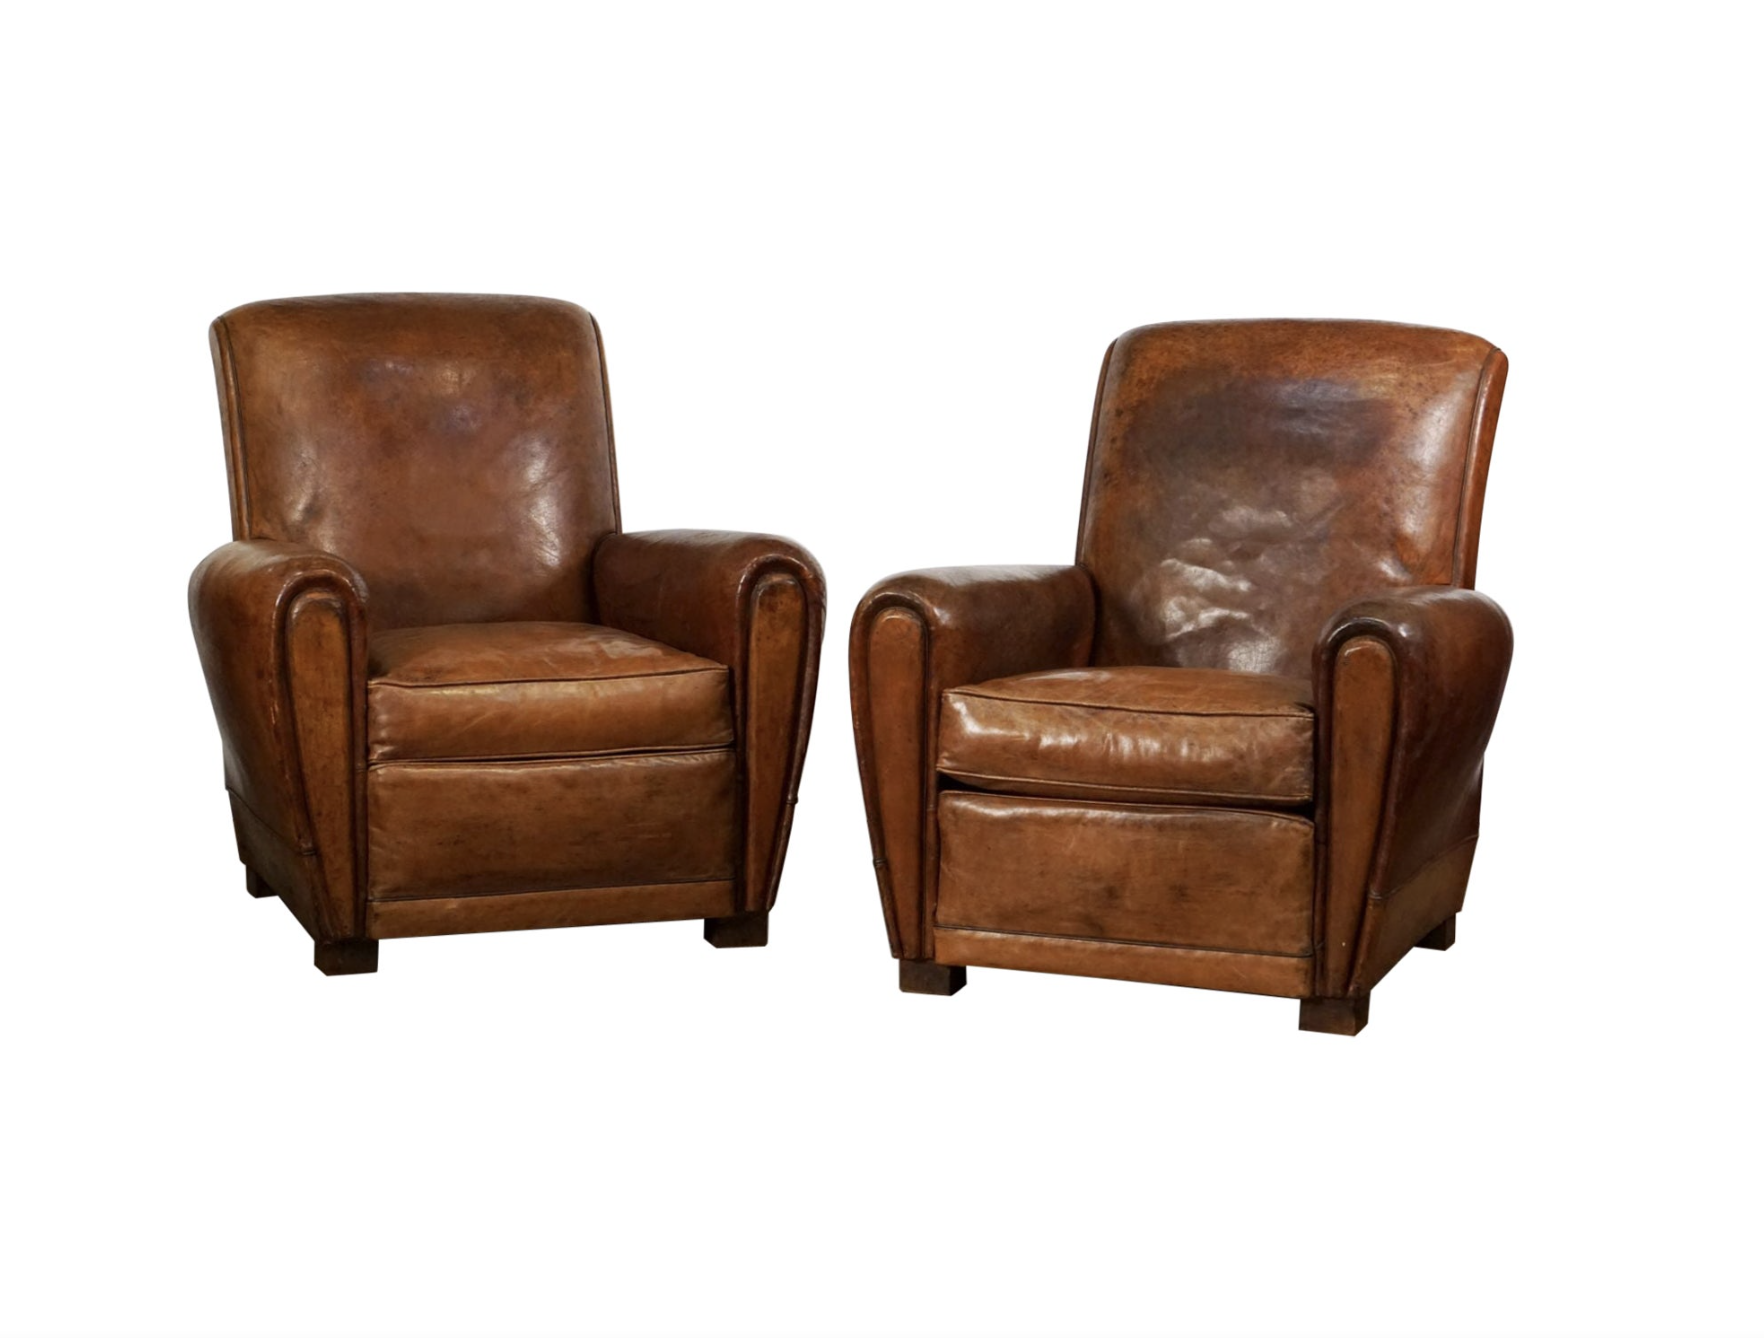 French Leather Club Chairs from the Art Deco Era ''Priced Individually''